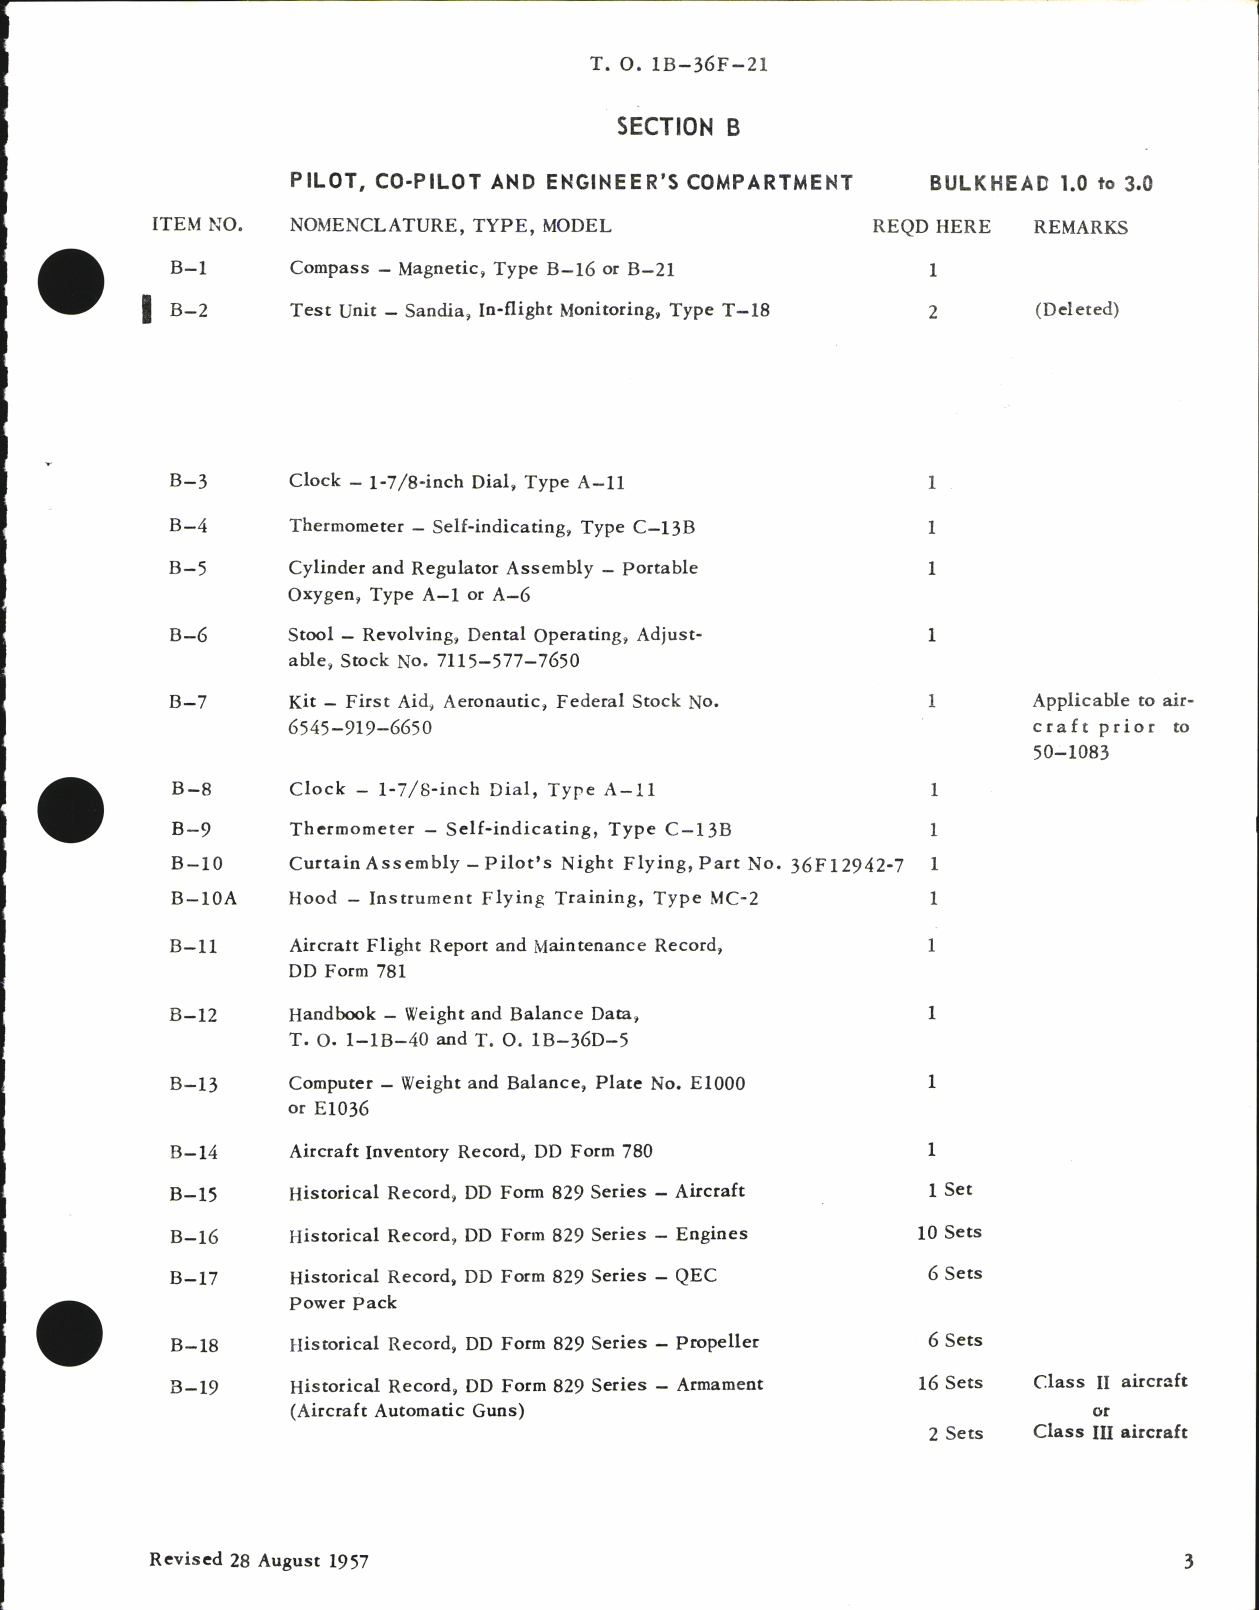 Sample page 5 from AirCorps Library document: Master Guide Aircraft Inventory Record for B-36F, H, and J Aircraft